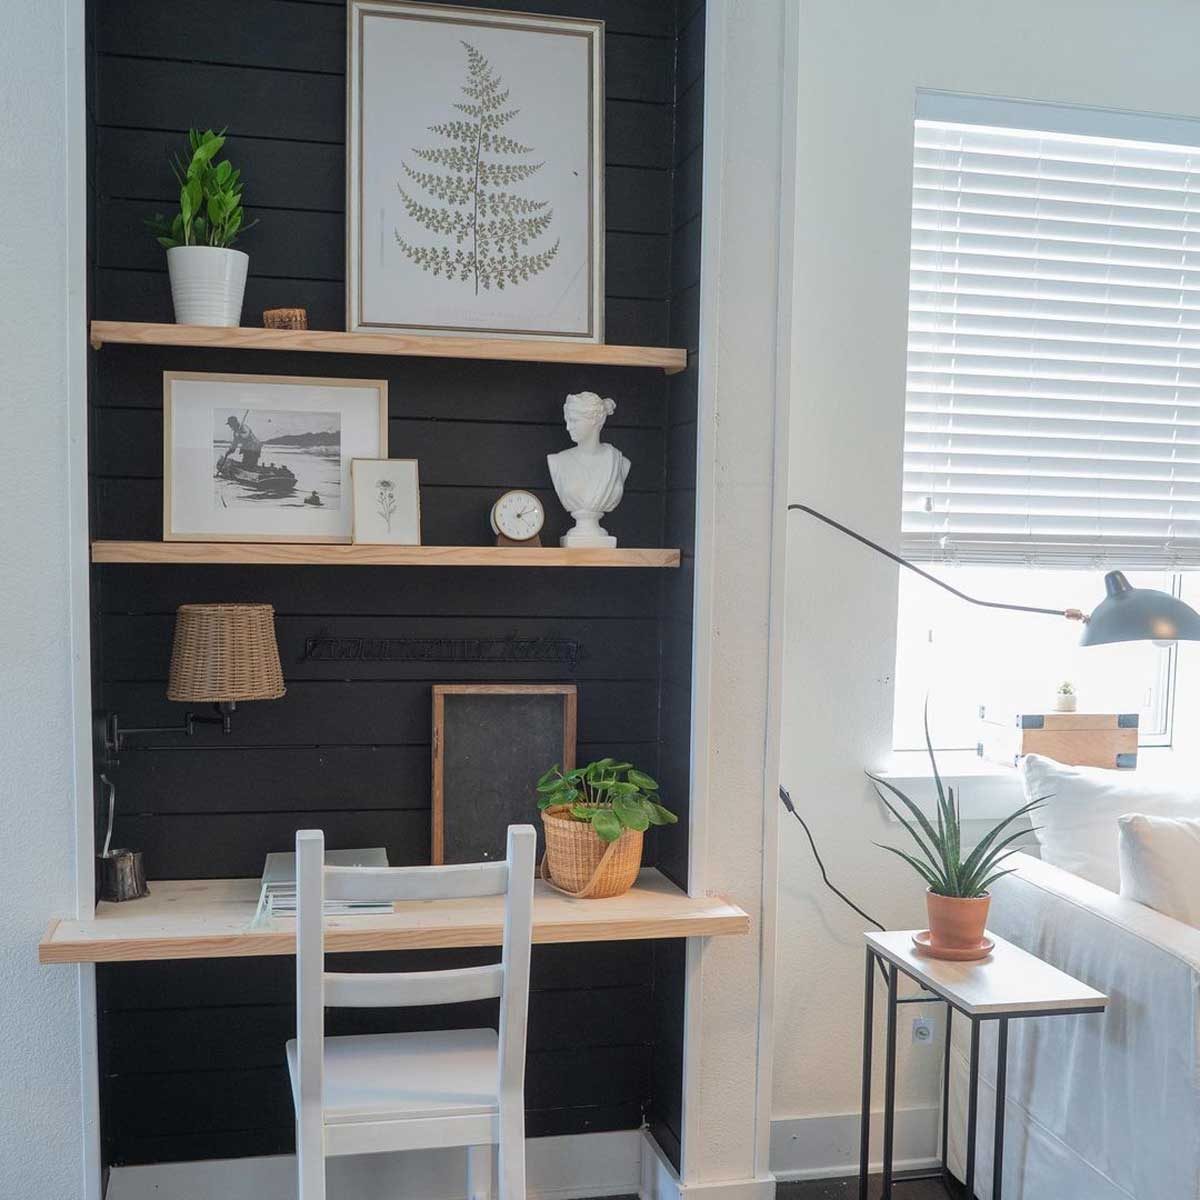 10 Ways to Maximize Space With Shelving | The Family Handyman